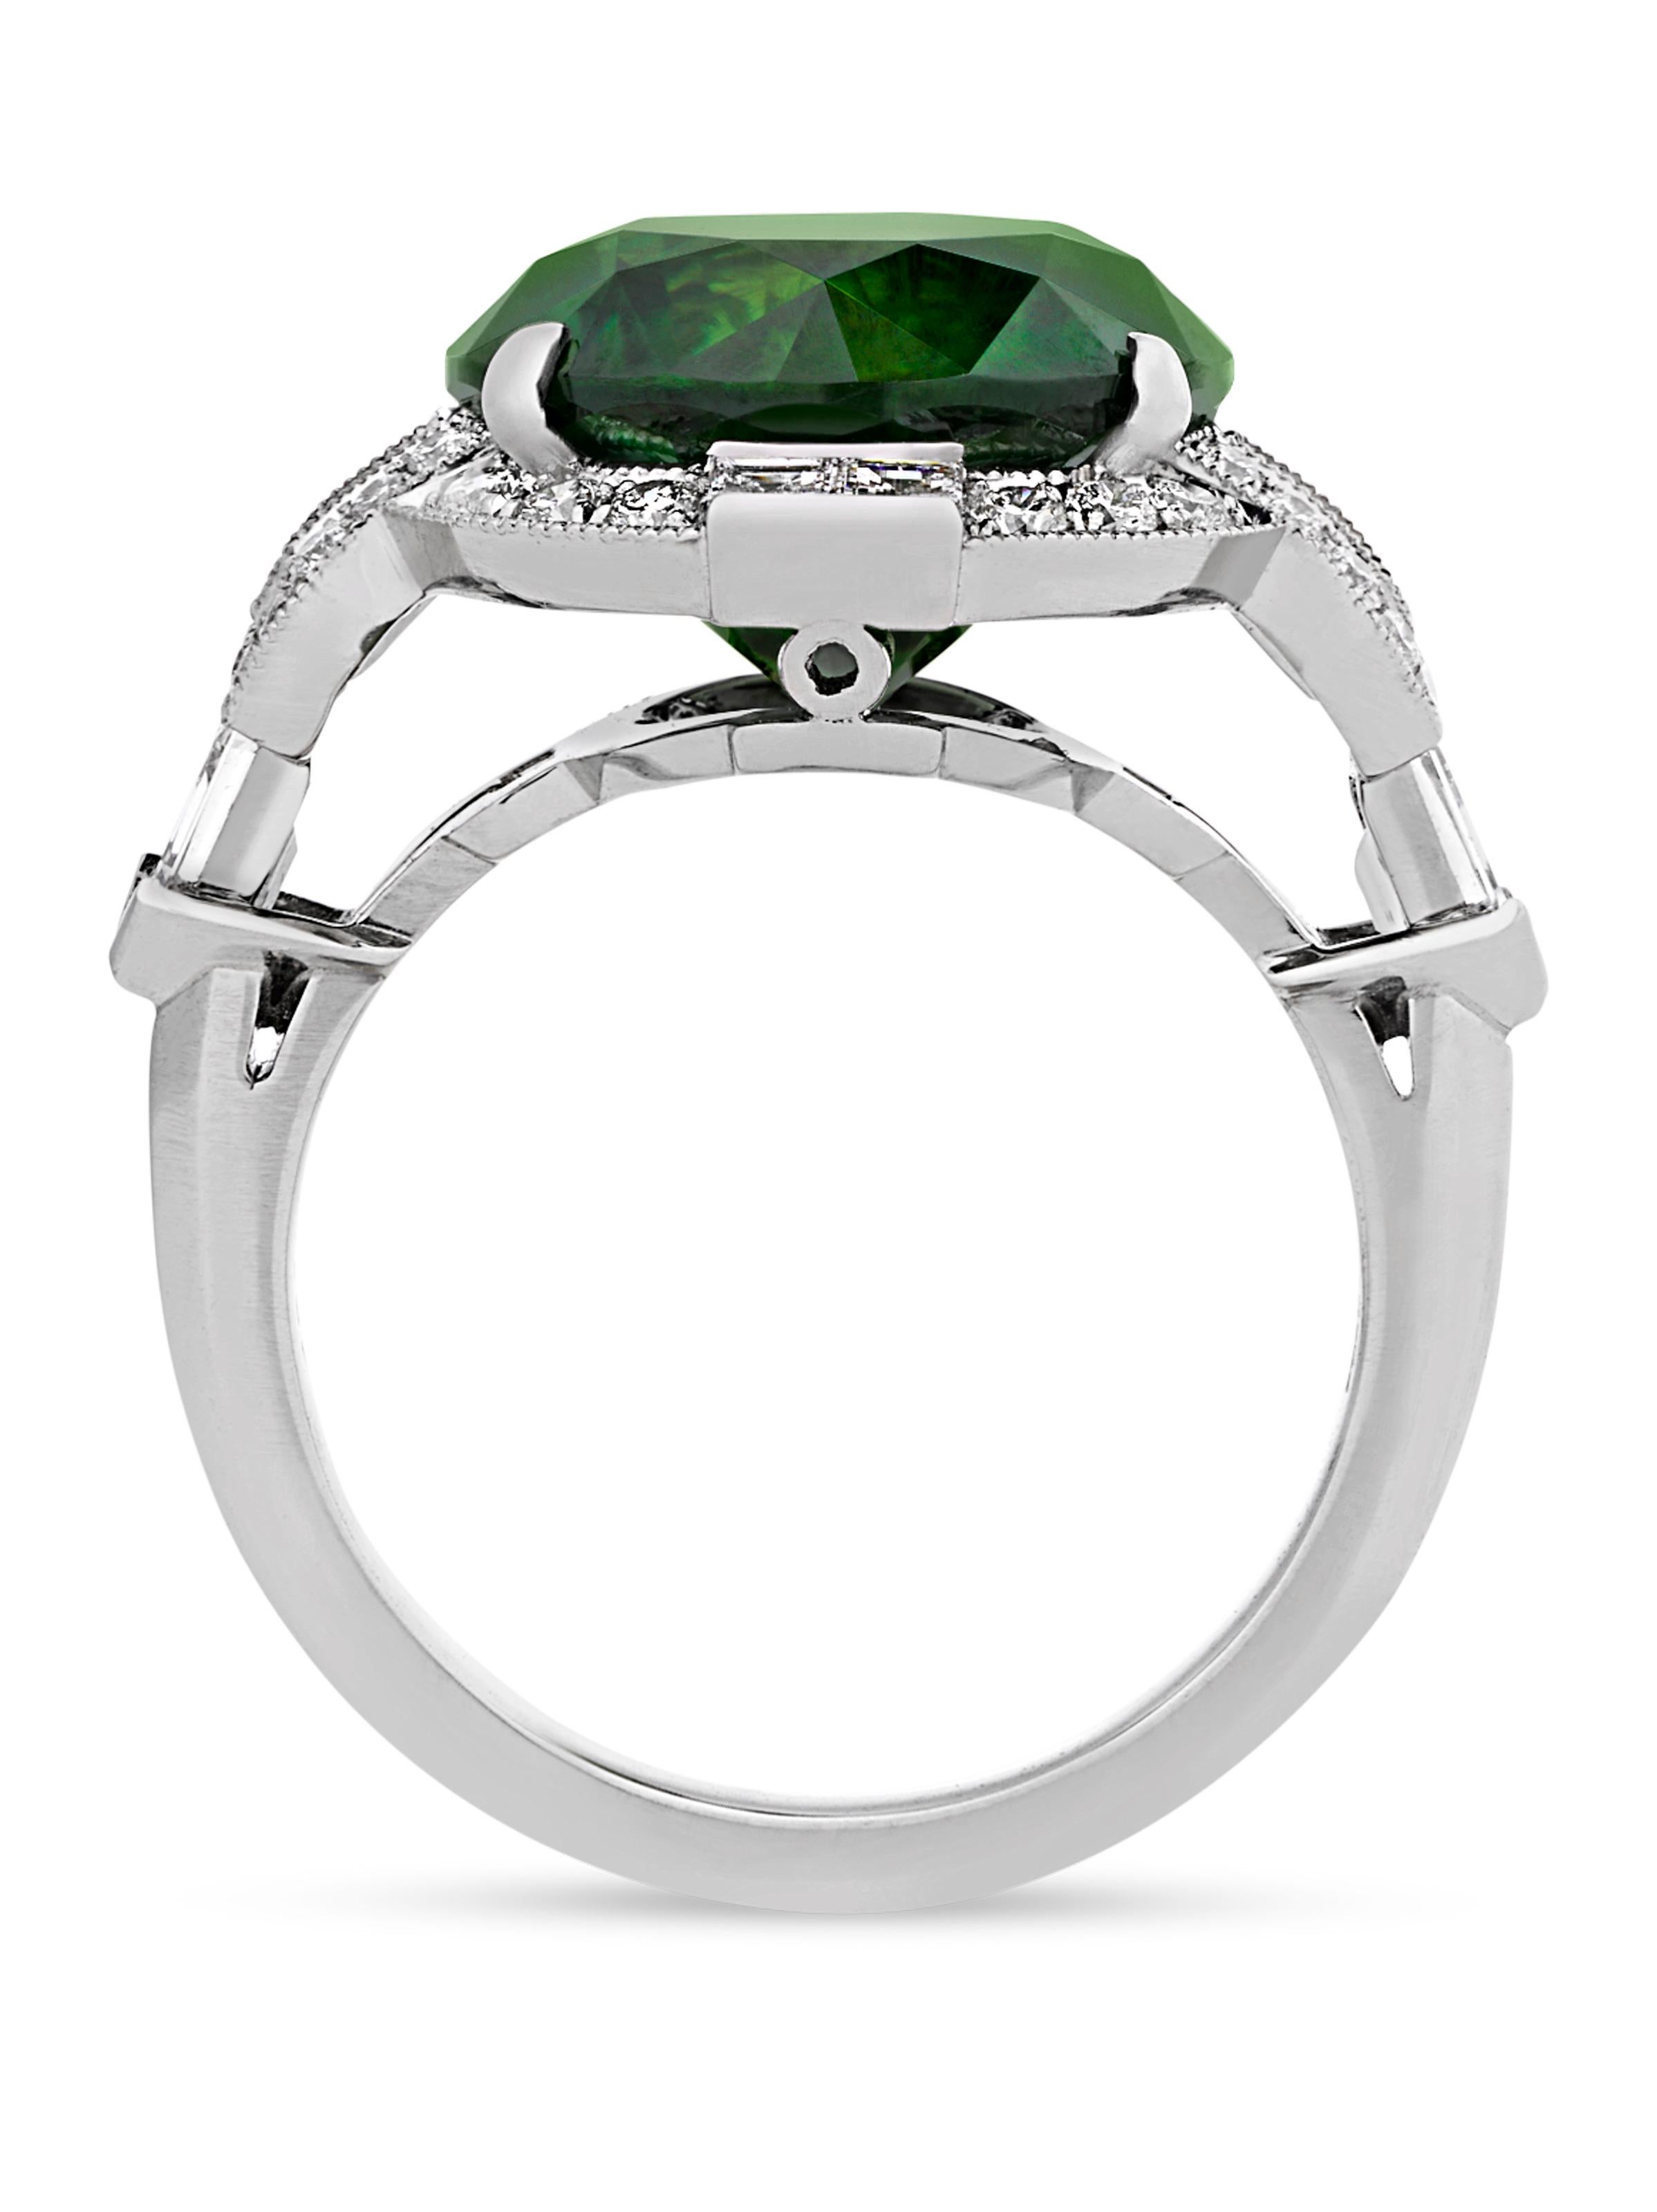 The demantoid garnet is among the rarest varieties of this coveted gemstone, and this example displays a particularly vivid, luminous green hue. Presented by famed jeweler Raymond Yard in an Art Deco-style platinum setting, the round brilliant-cut